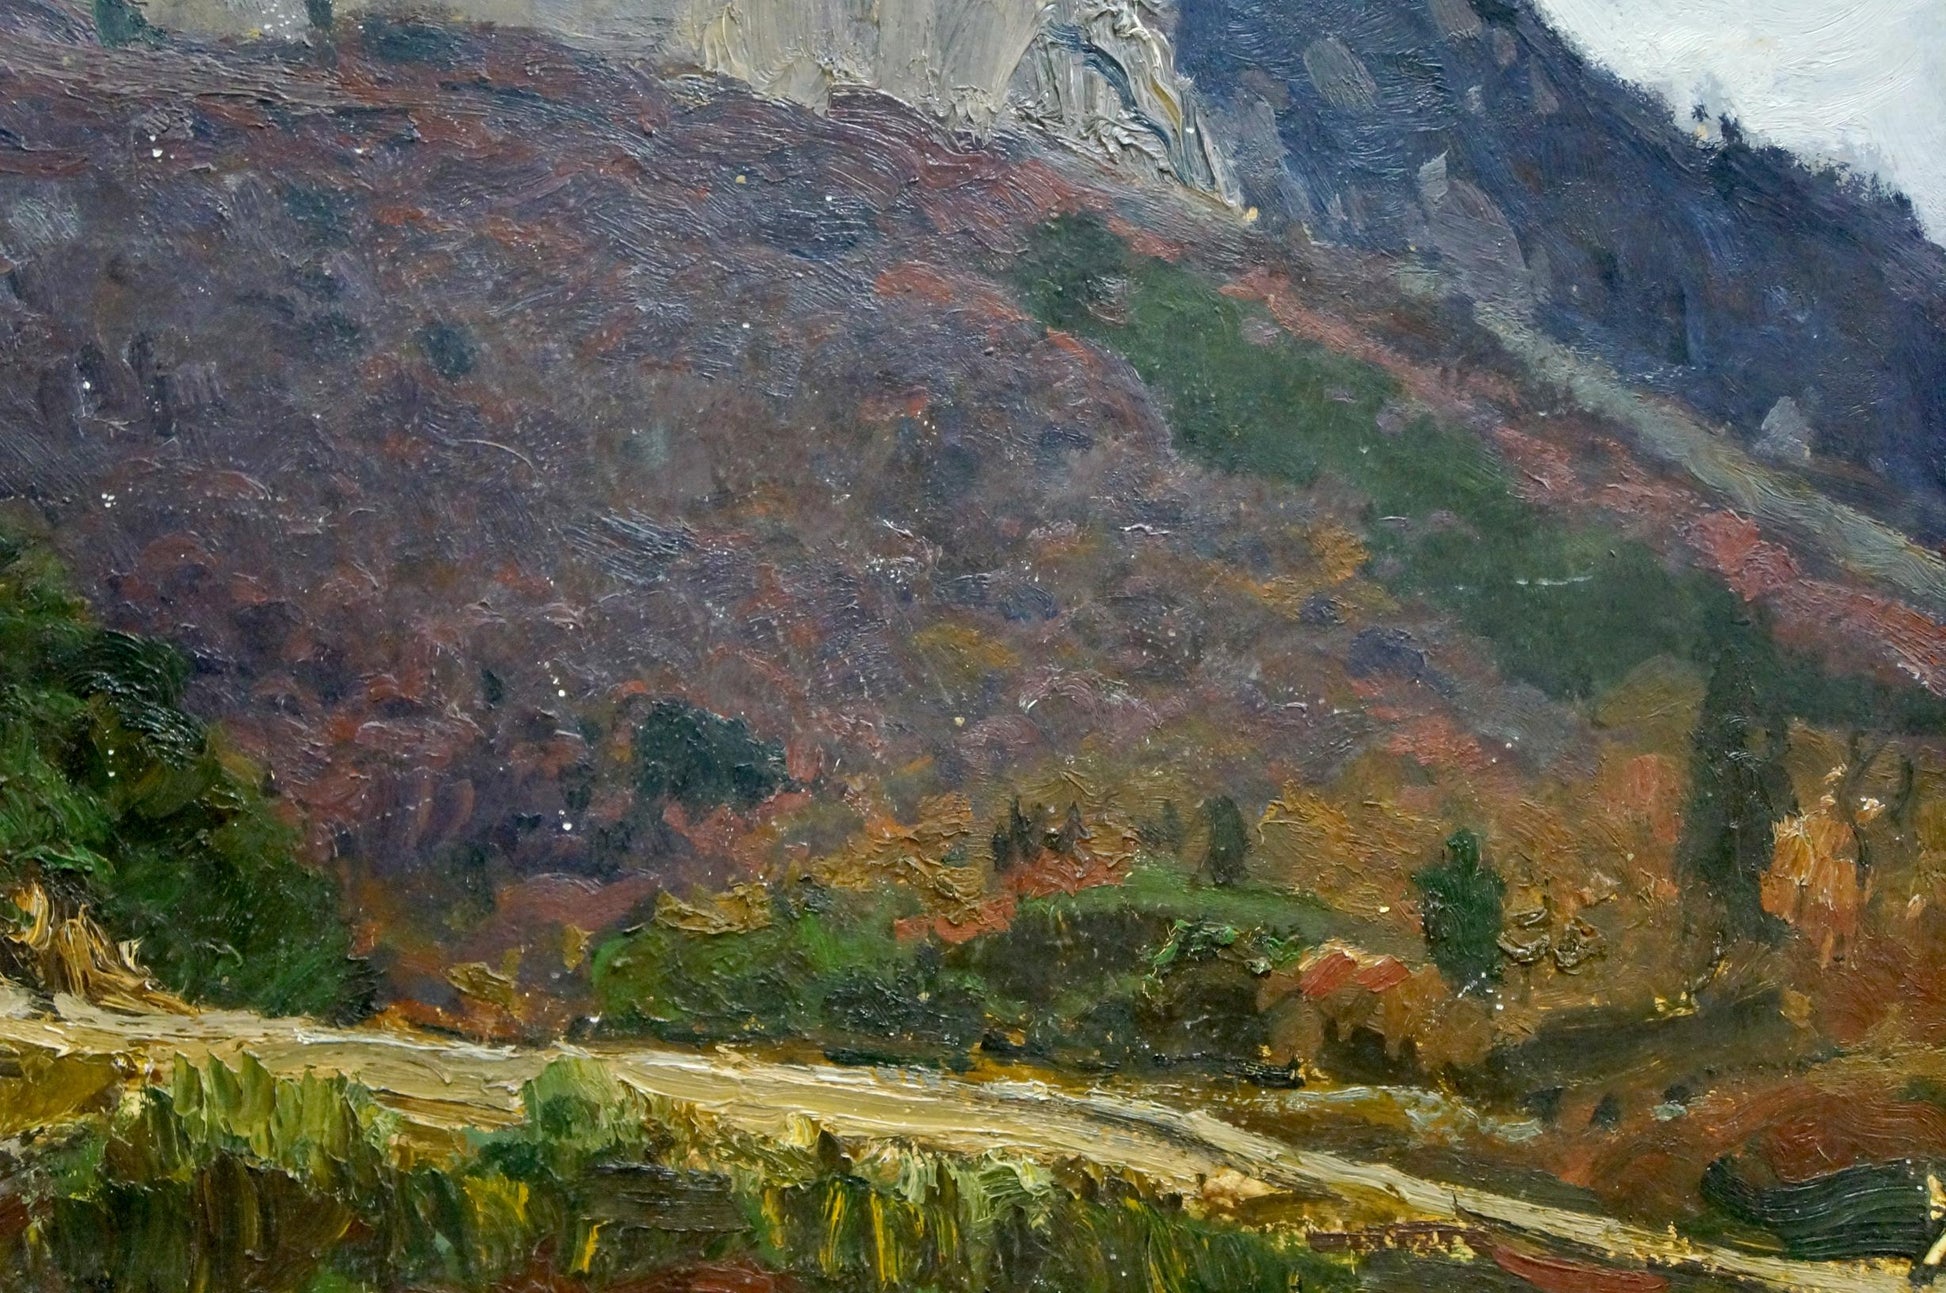 Mountain Landscape depicted in oil paint by Peter Kuzmich Stolyarenko